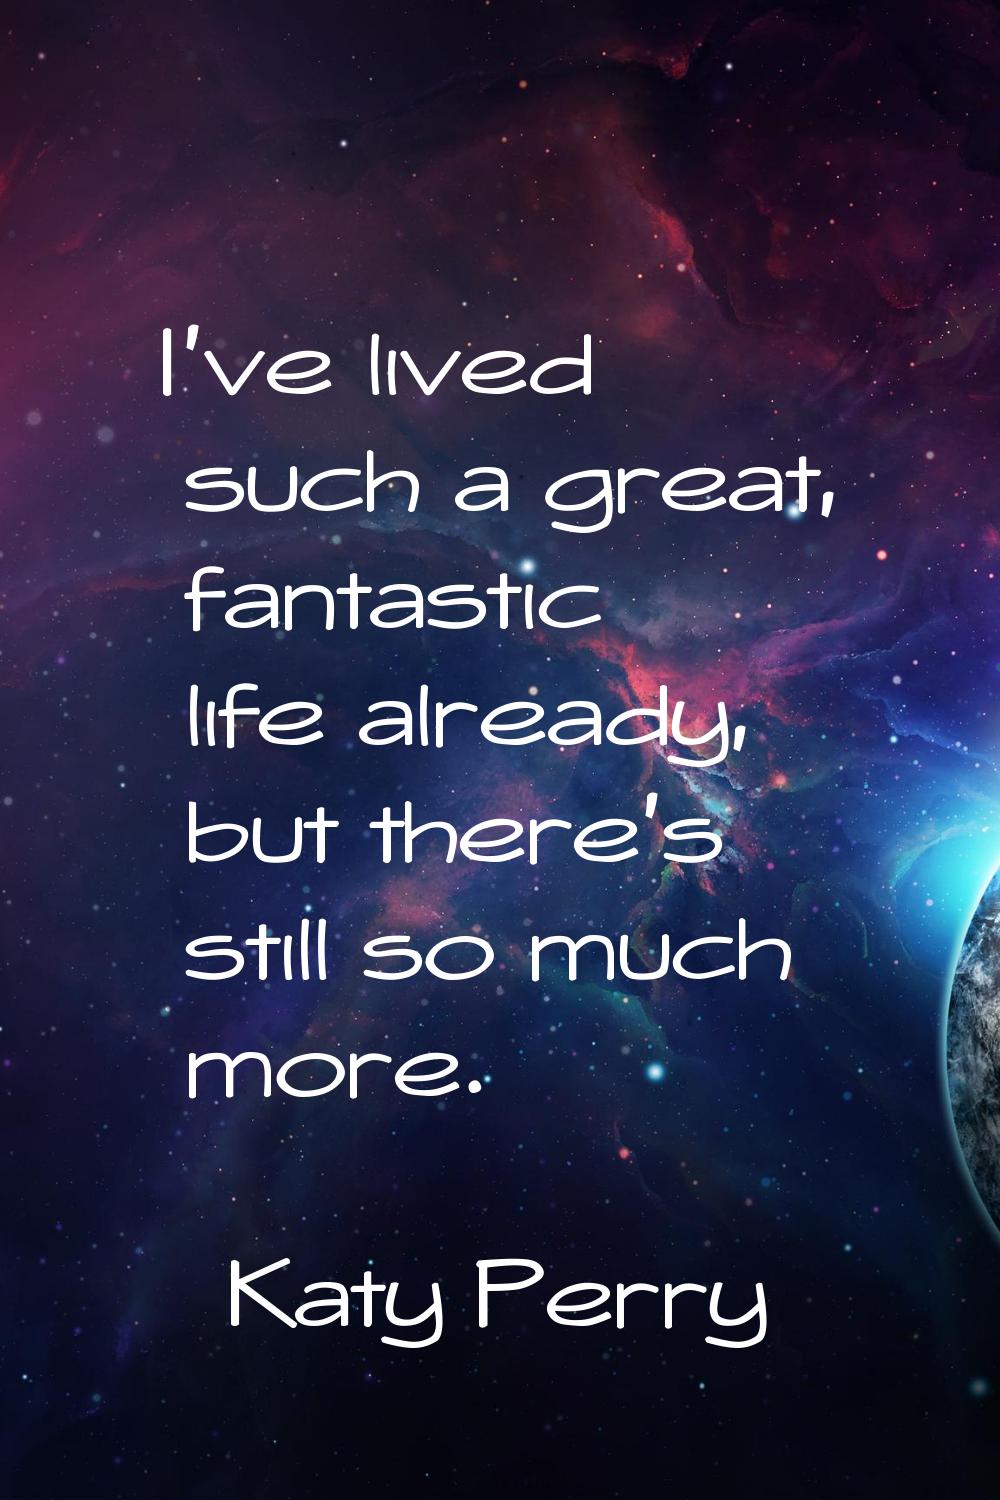 I've lived such a great, fantastic life already, but there's still so much more.